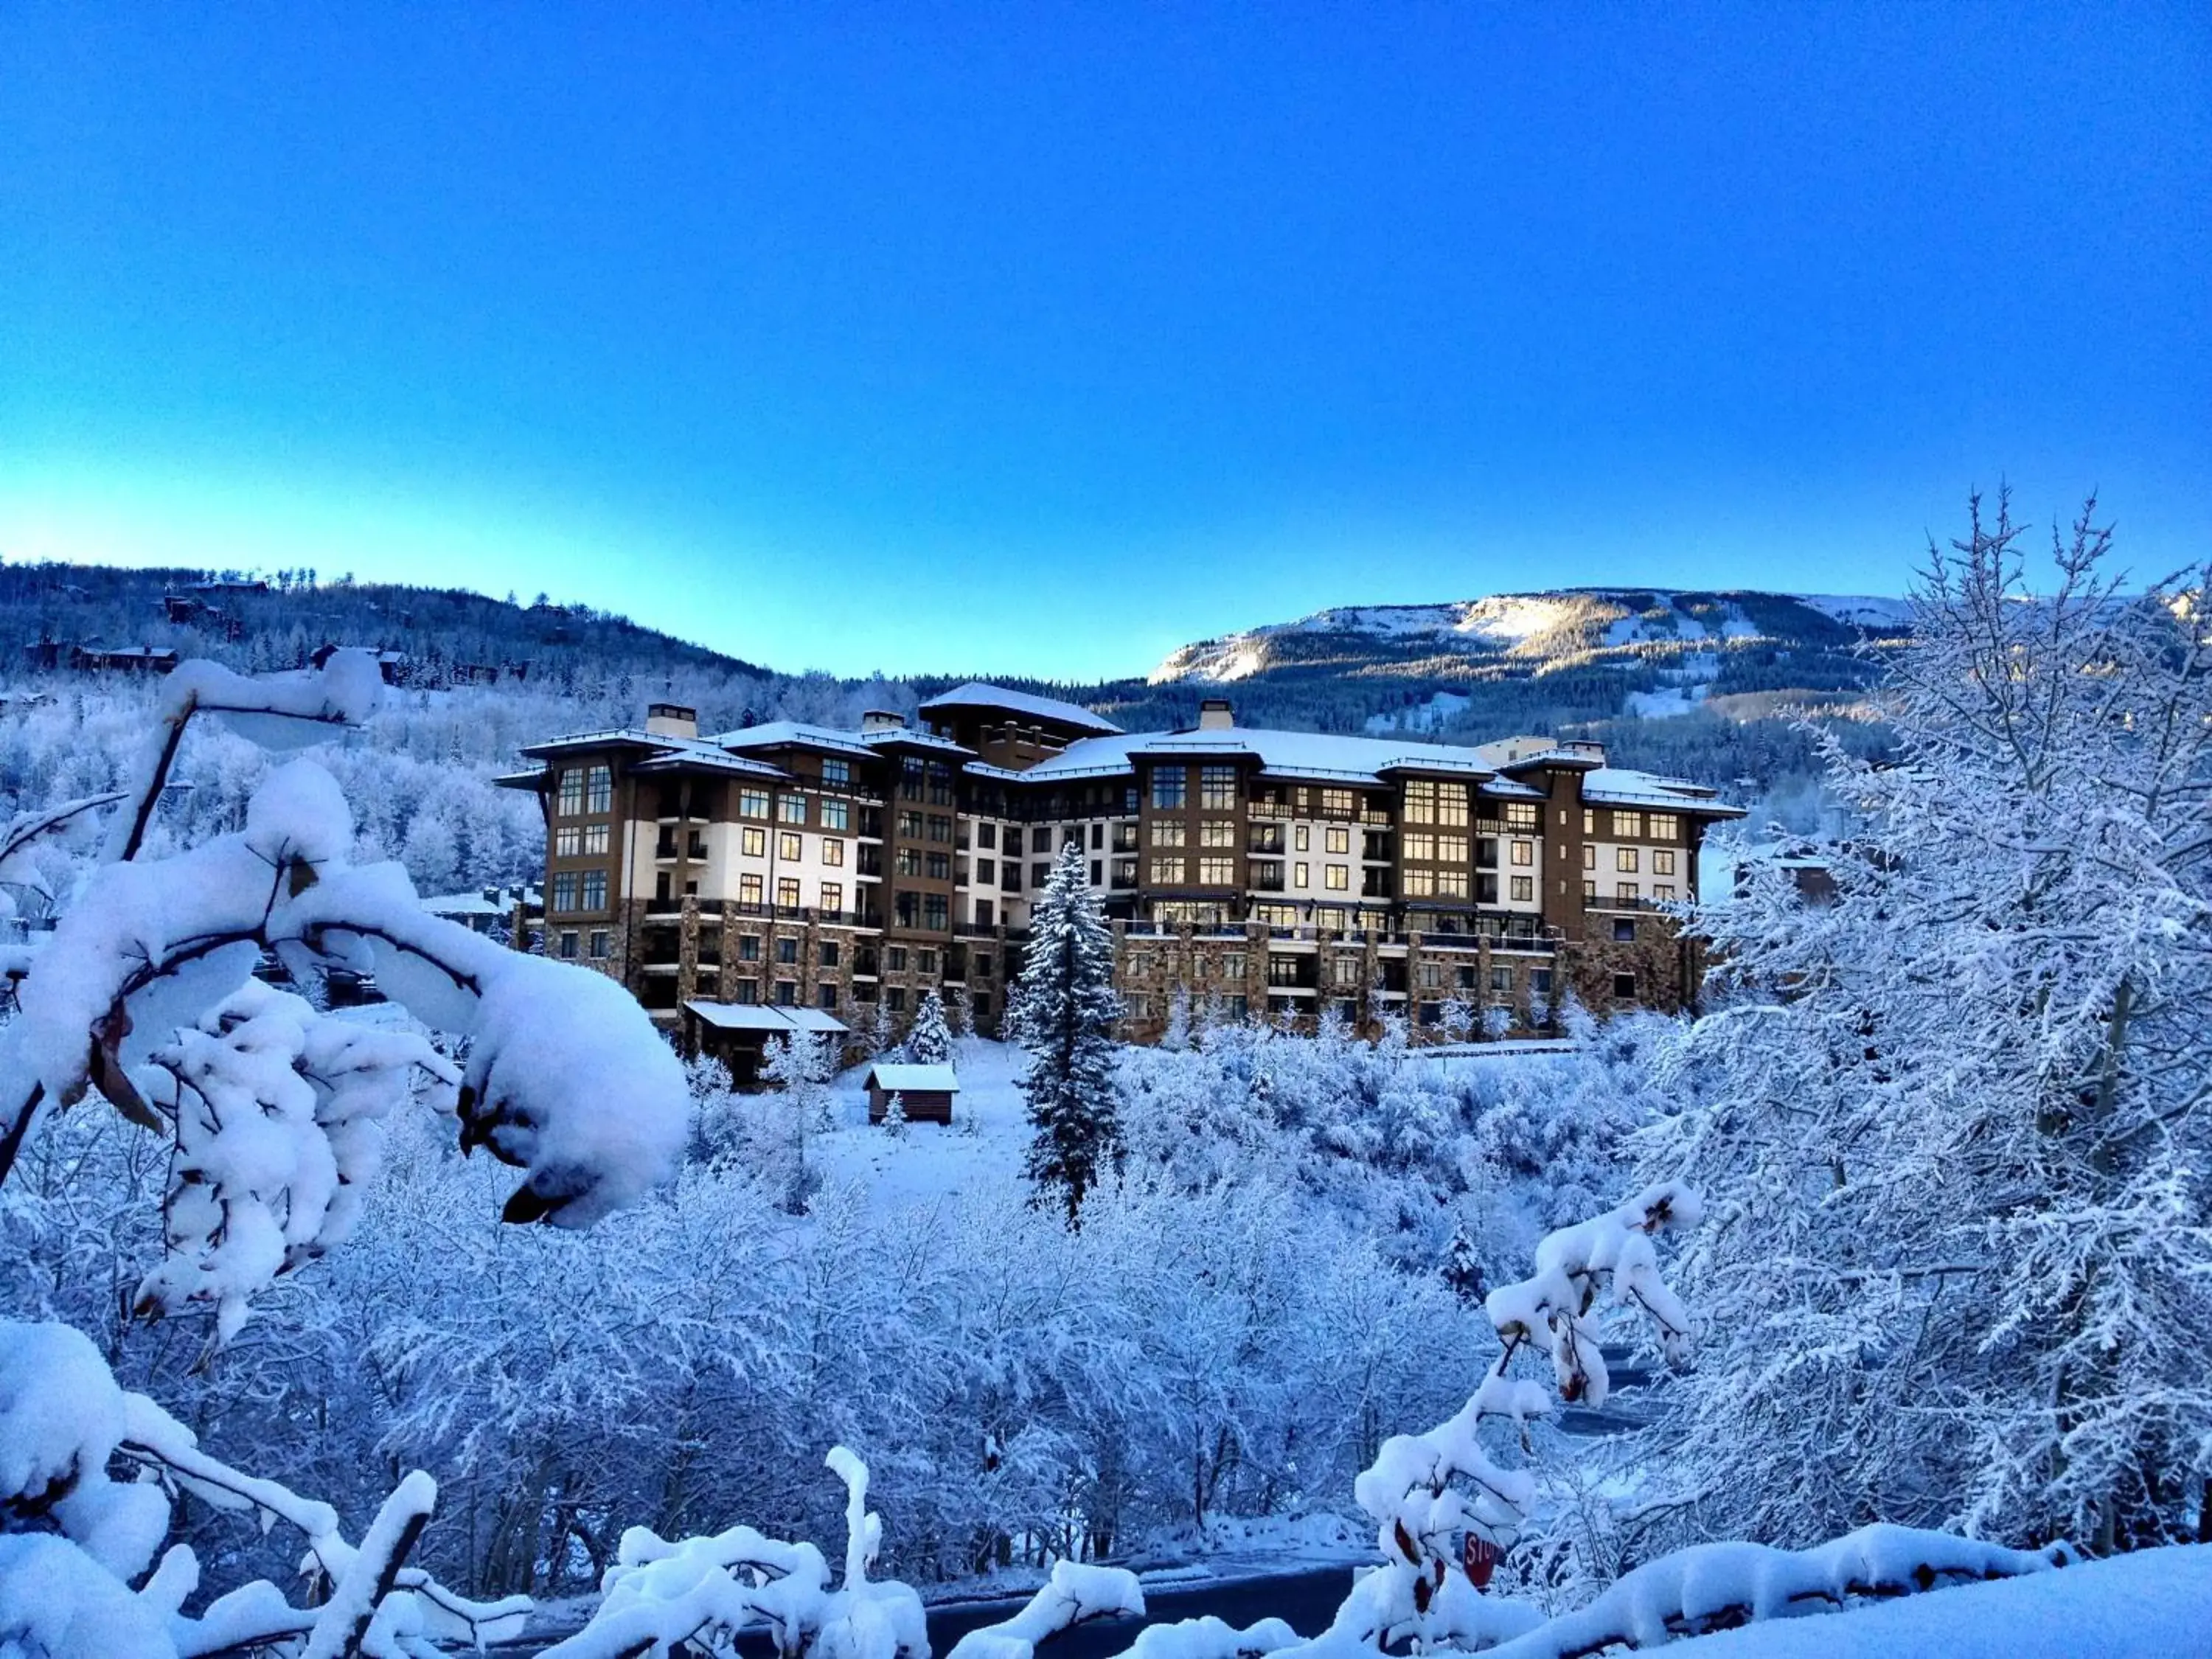 Winter in Viceroy Snowmass